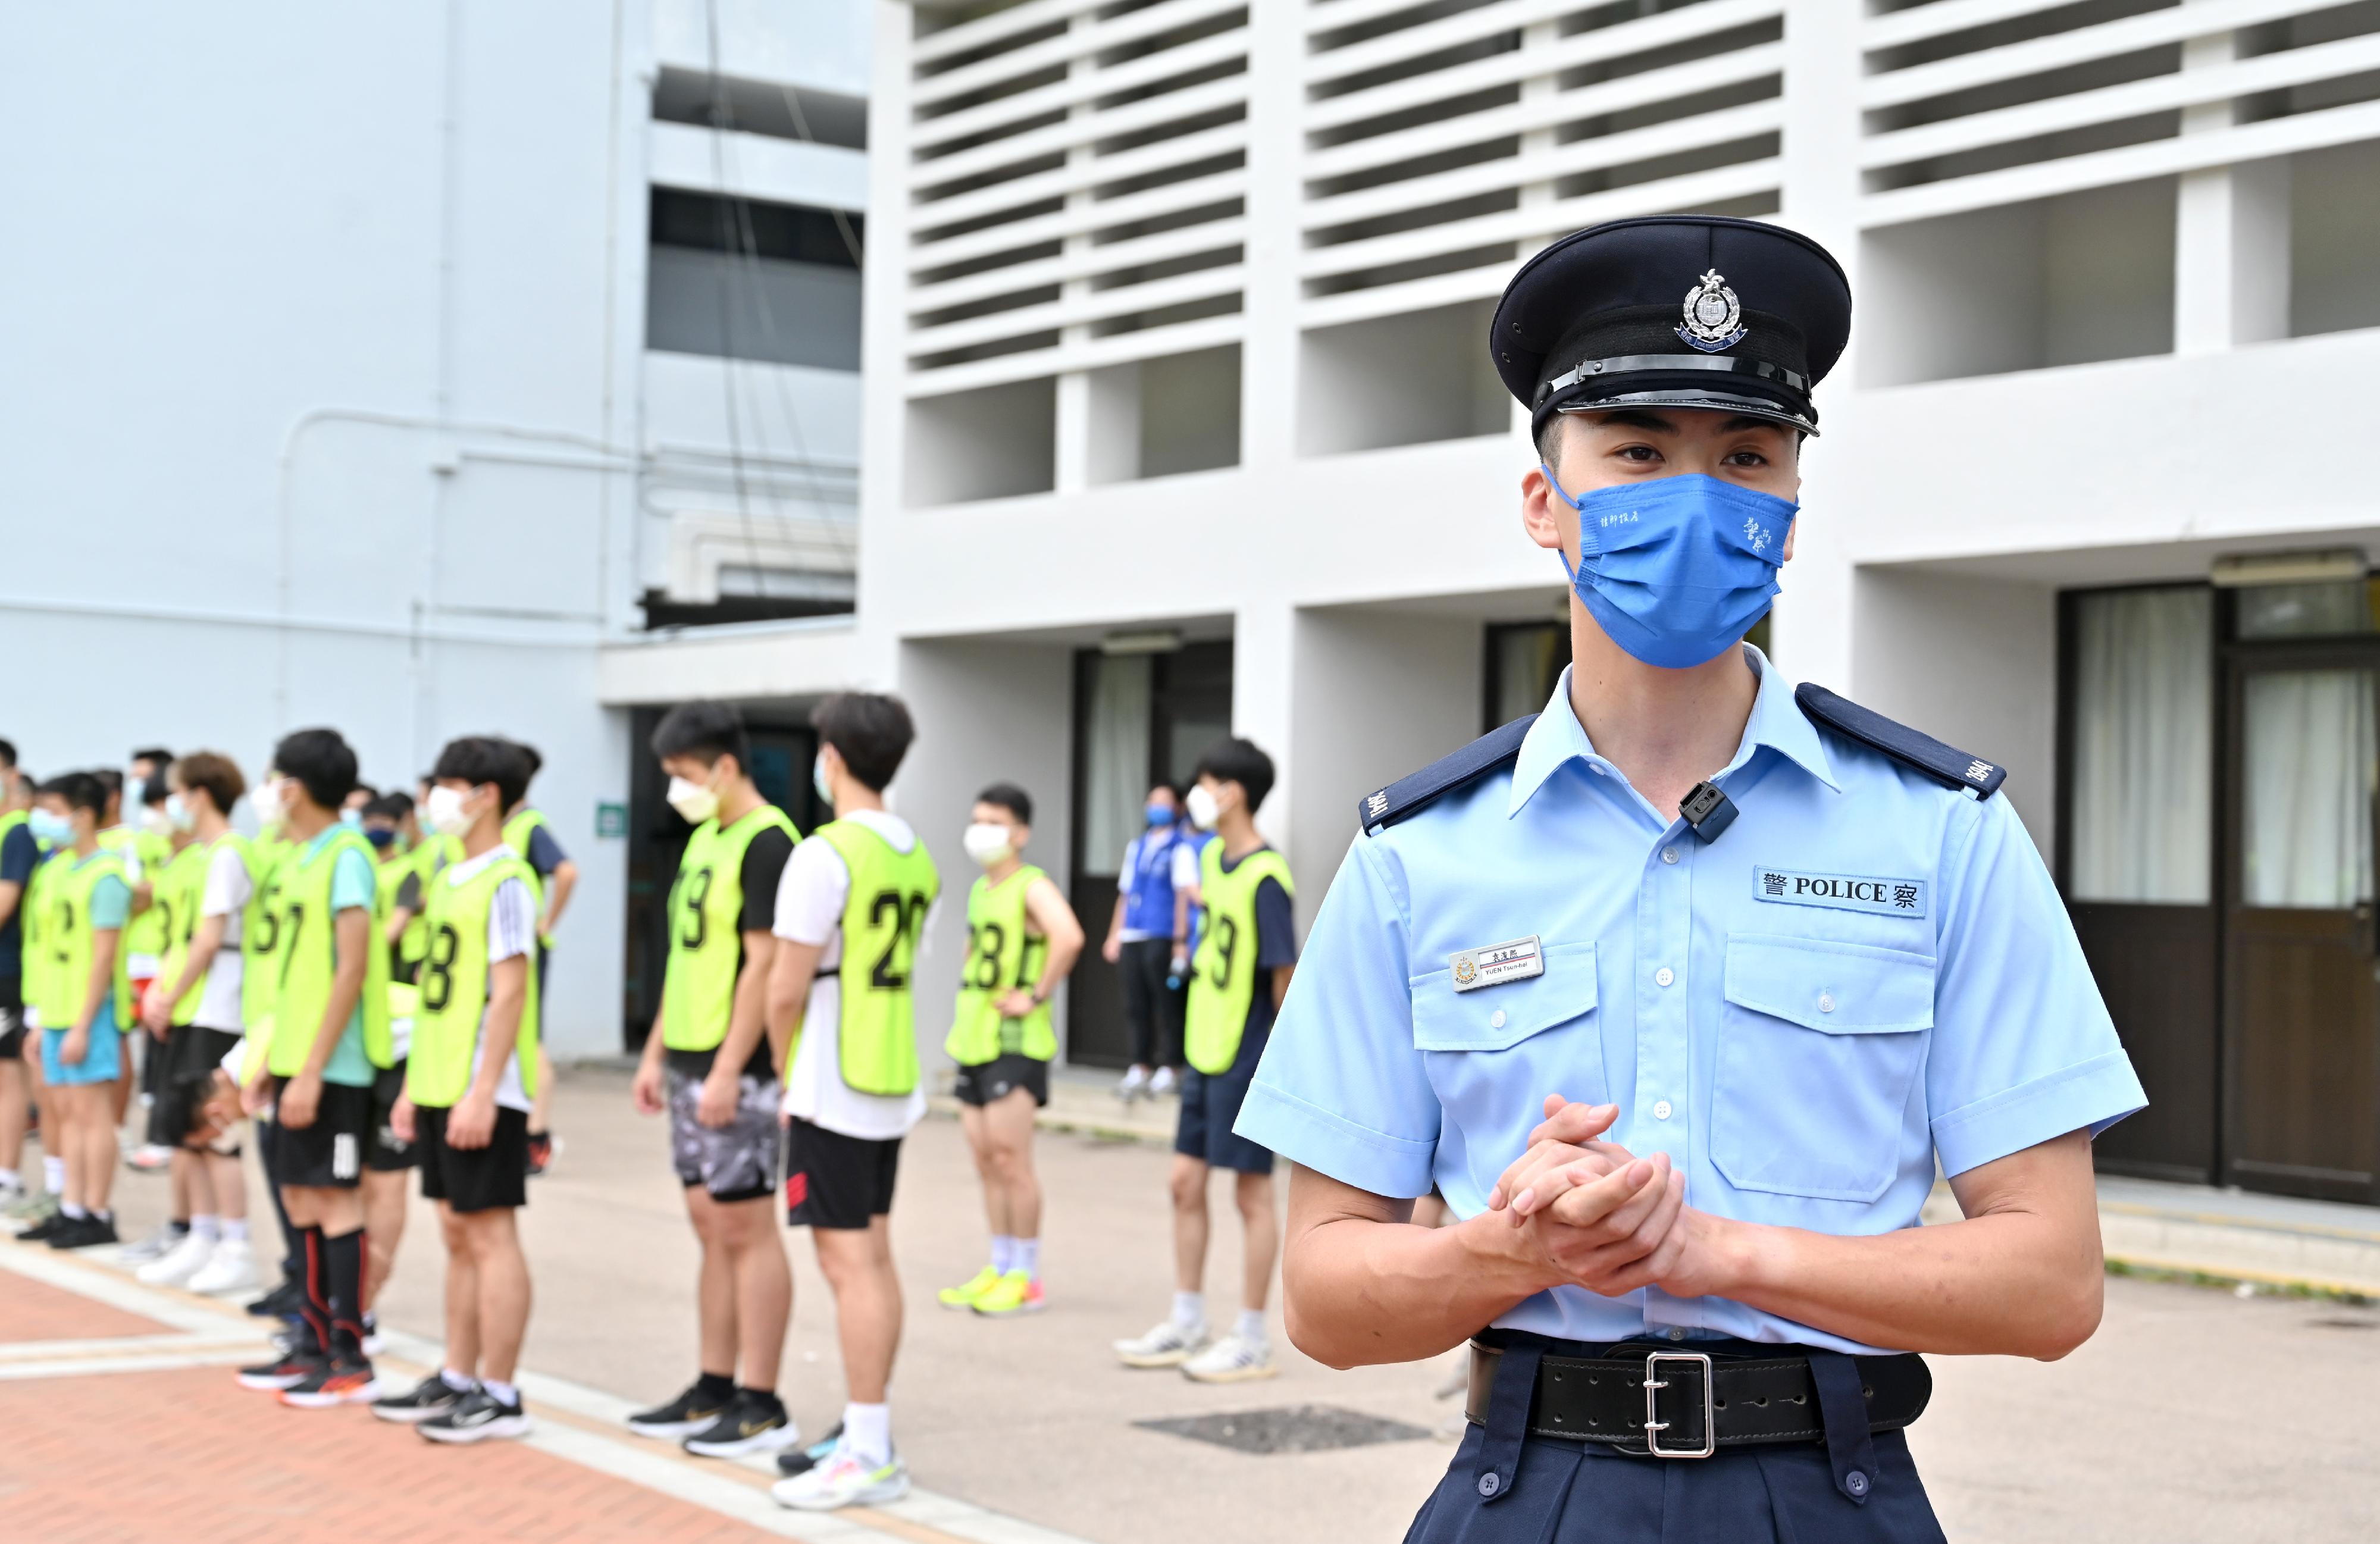 The Hong Kong Police Force today (June 19) organised the Police Recruitment Experience and Assessment Day at the Hong Kong Police College. Photo shows "Recruitment Spokesperson" sharing information about the requirement of physical fitness tests.